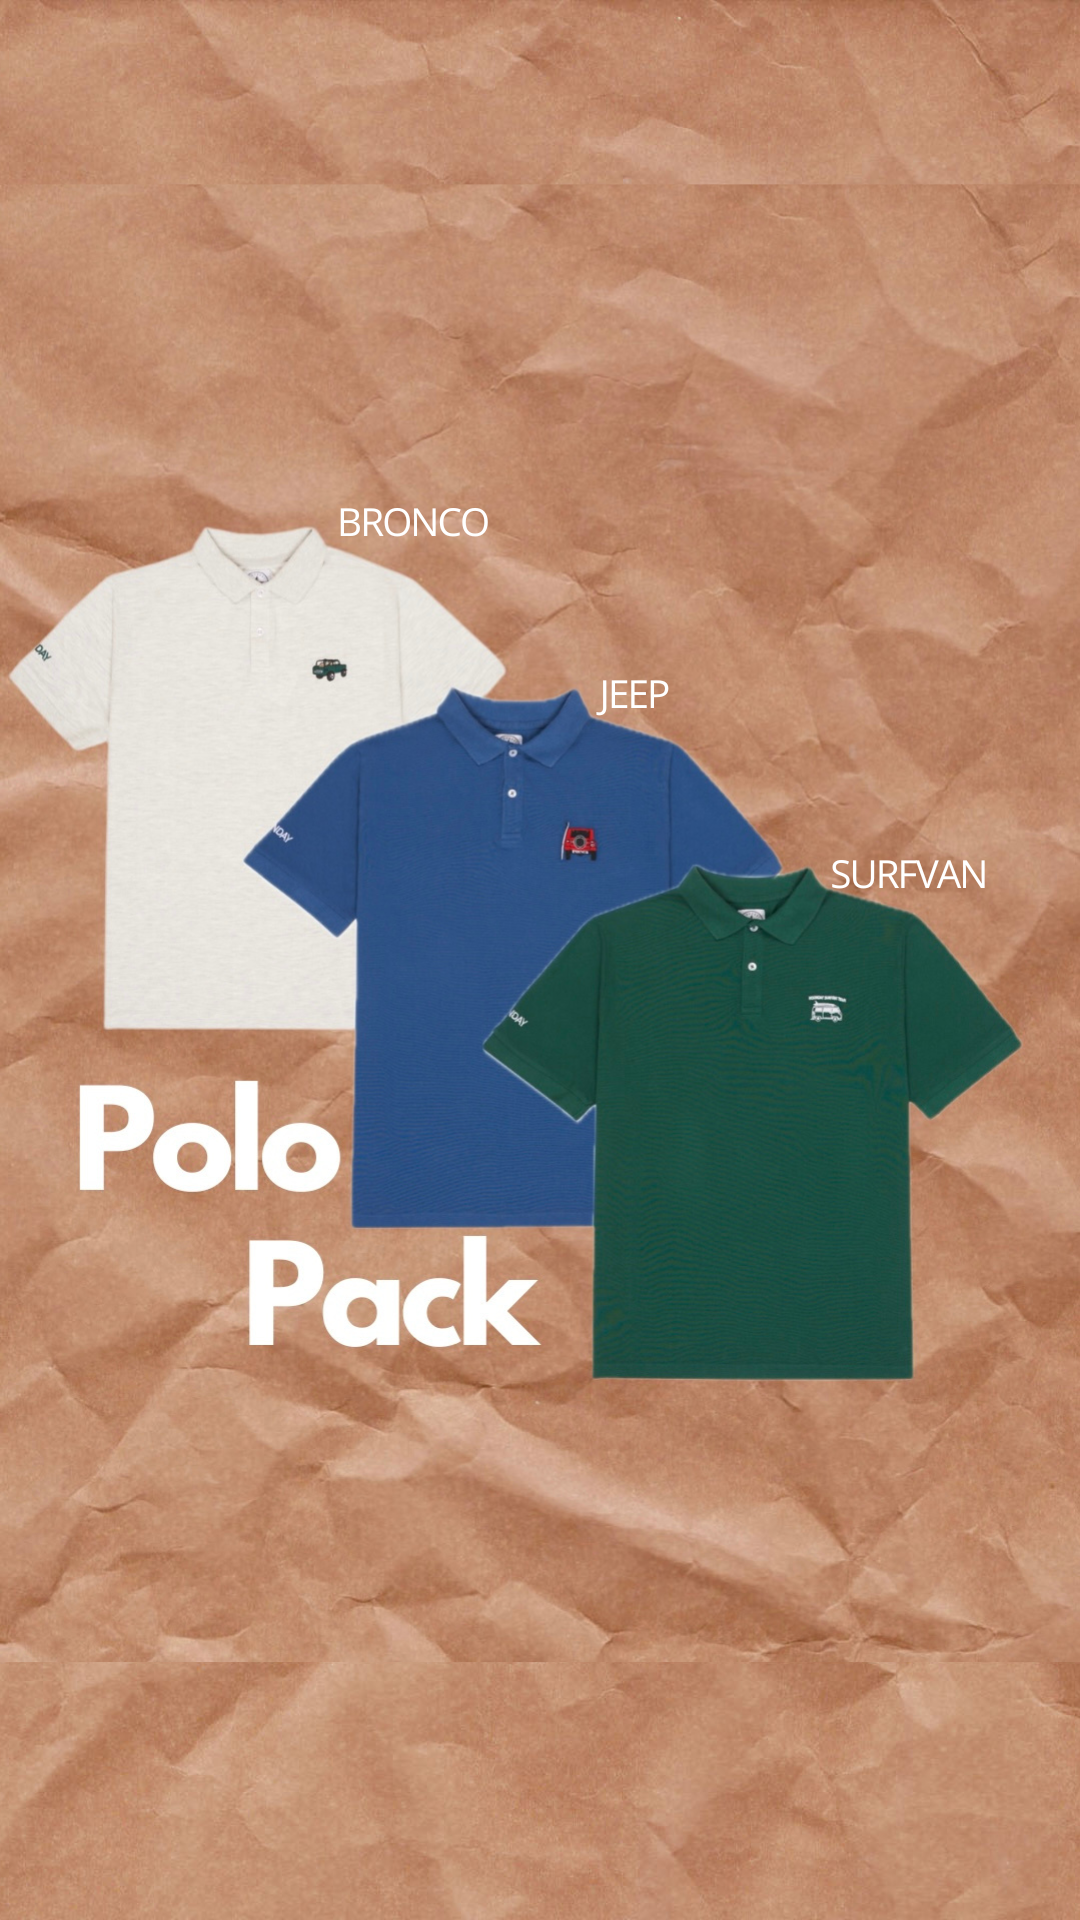 Polo Pack